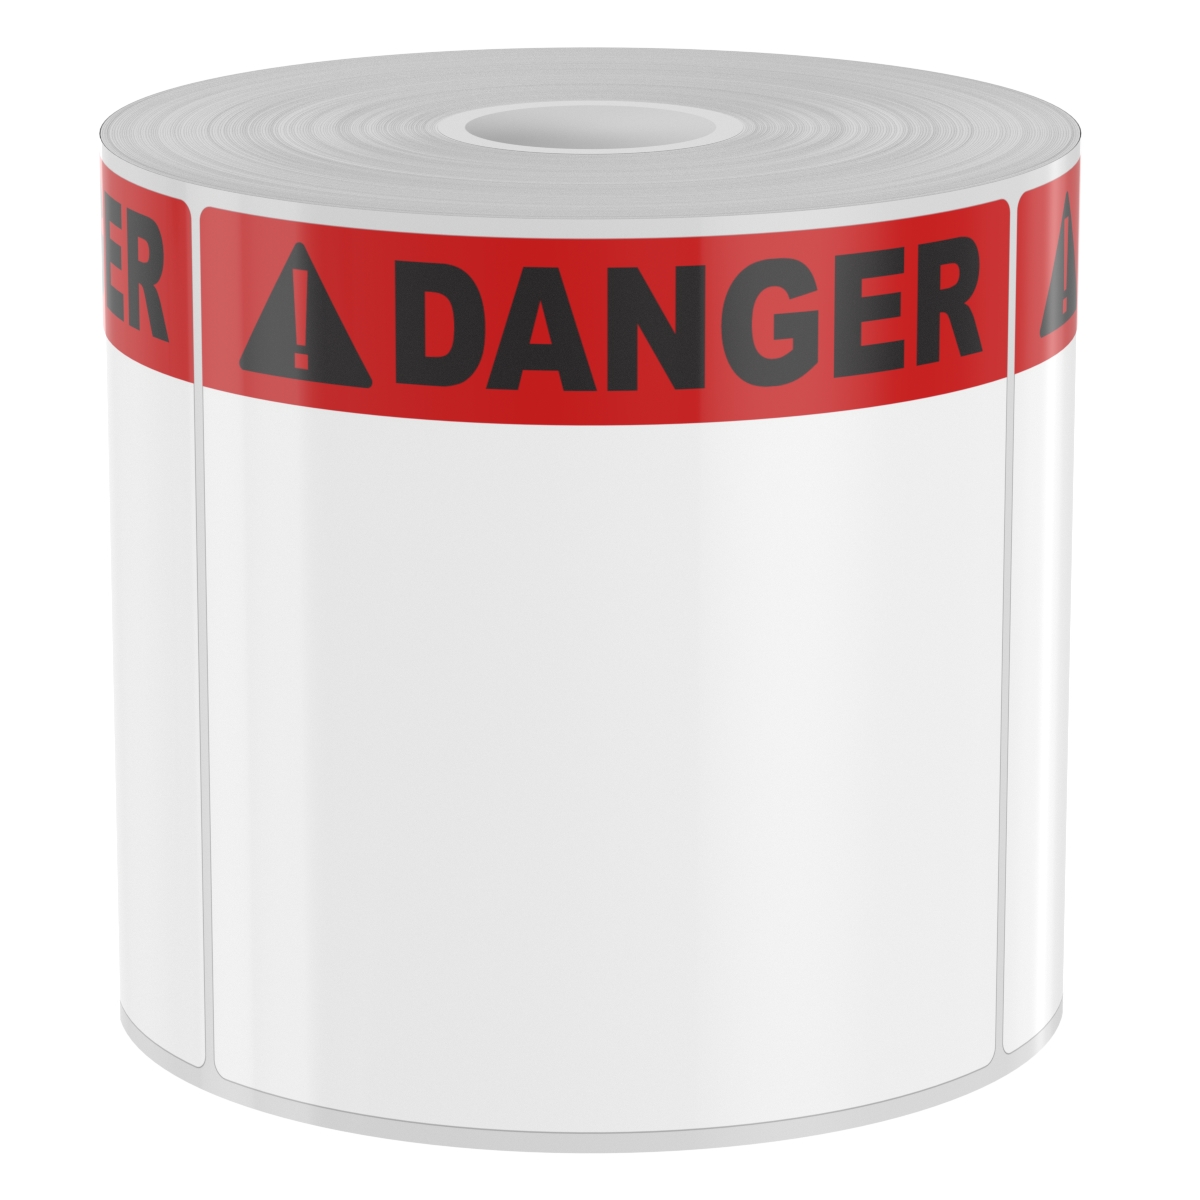 Detail view for 250 4" x 4" High-Performance Red Band with Black Danger